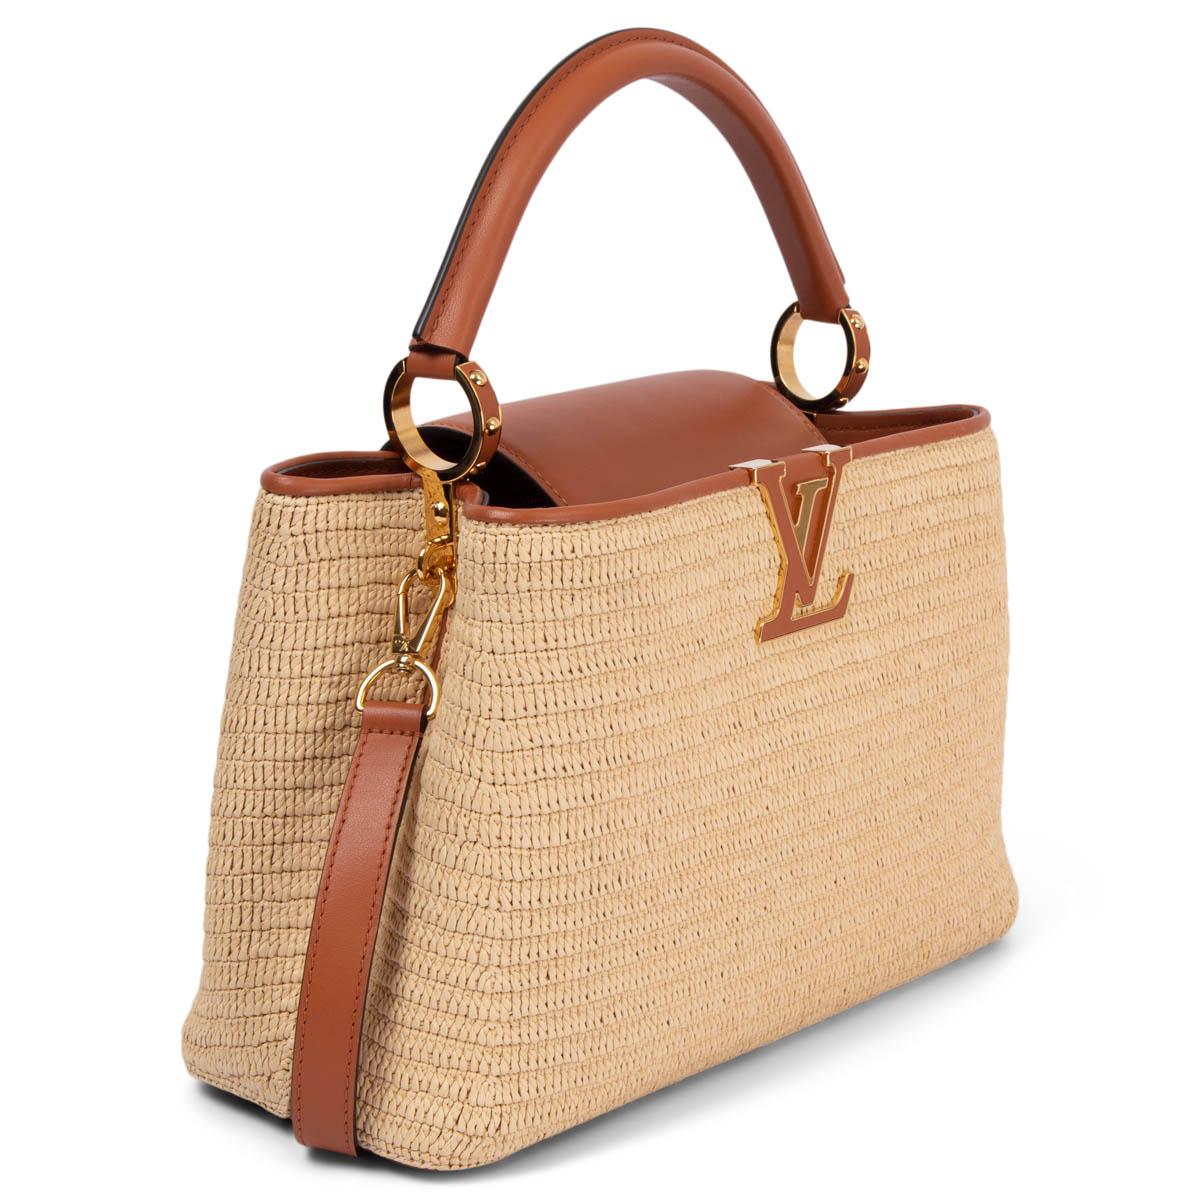 100% authentic Louis Vuitton Capucines MM bag is made from braided raffia and smooth caramel cowhide leather on the handle, trim and strap featuring gold-tone hardware. Opens with a flap to a compartmented interior with a zipped pocket against the